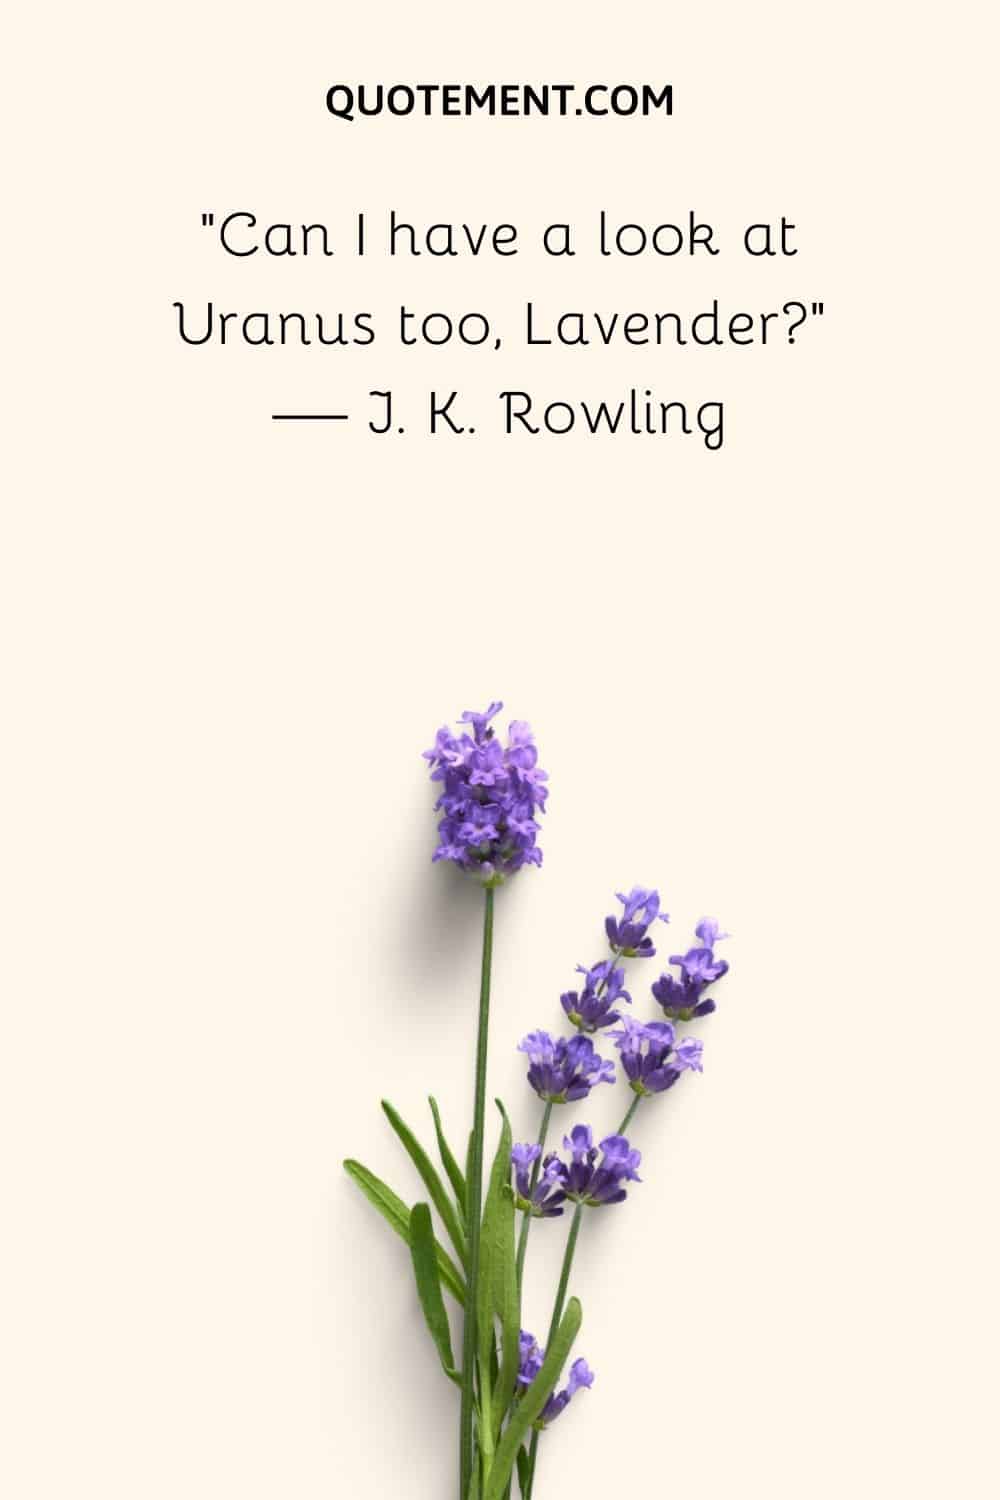 Can I have a look at Uranus too, Lavender